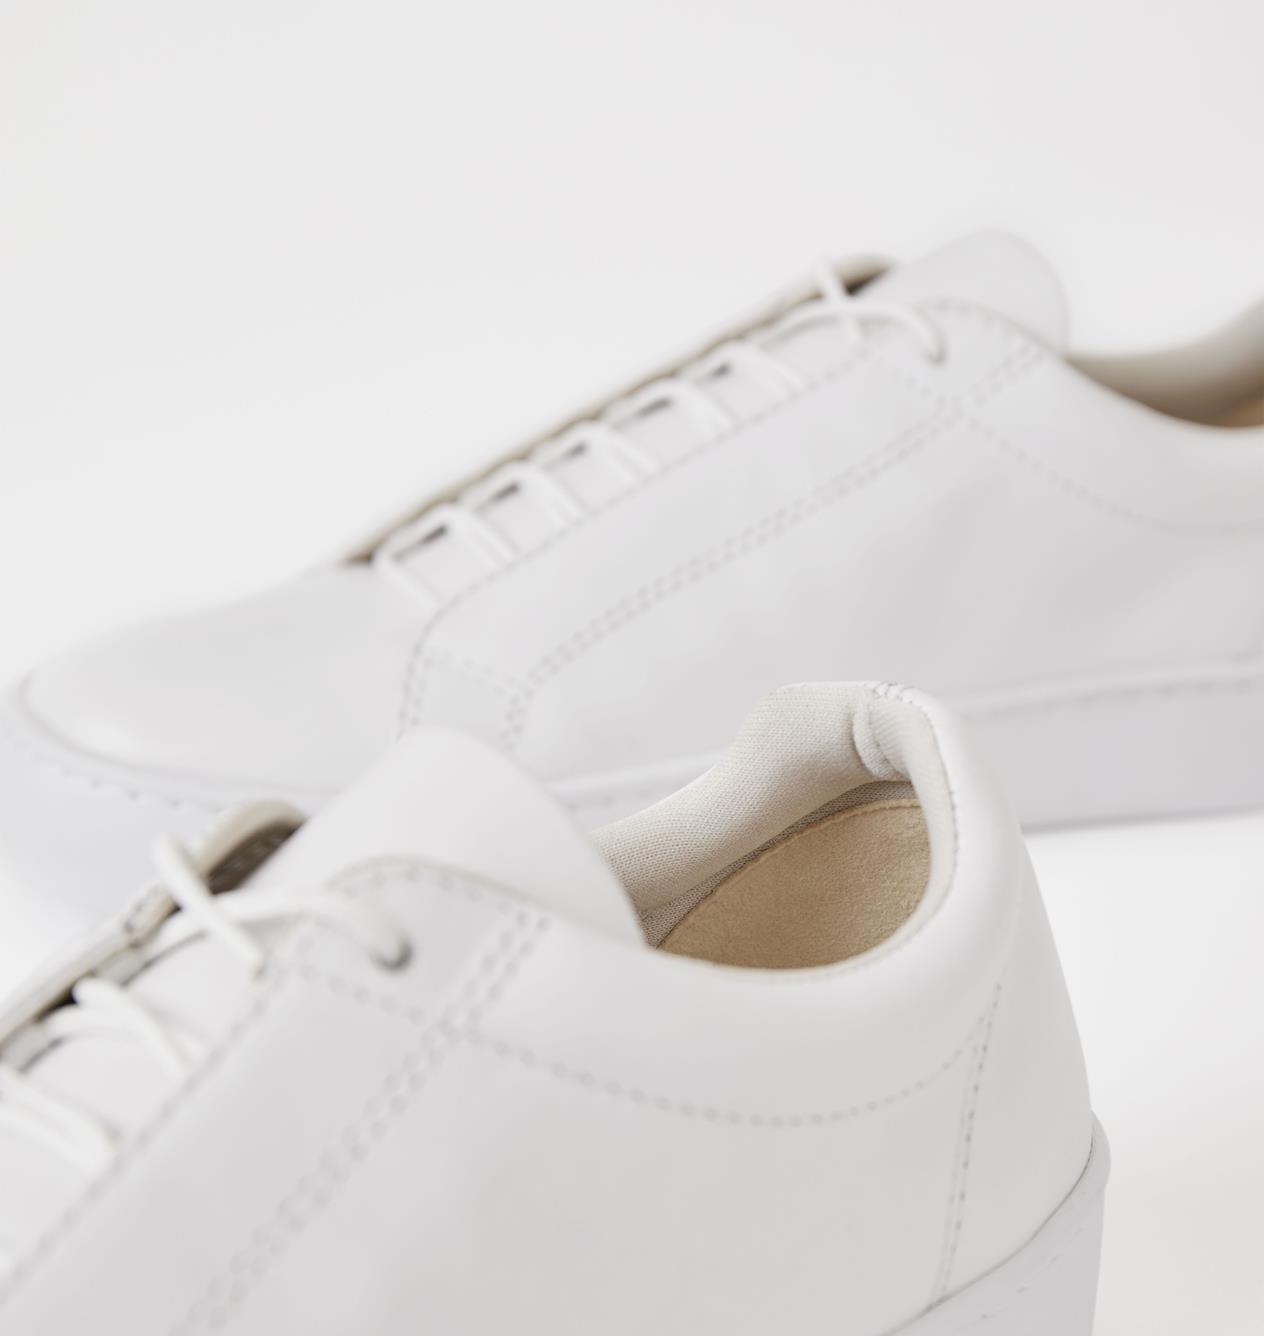 Vagabond Zoe Womens Trainers Lace up Low top In White Leather UK Sizes 3-8 